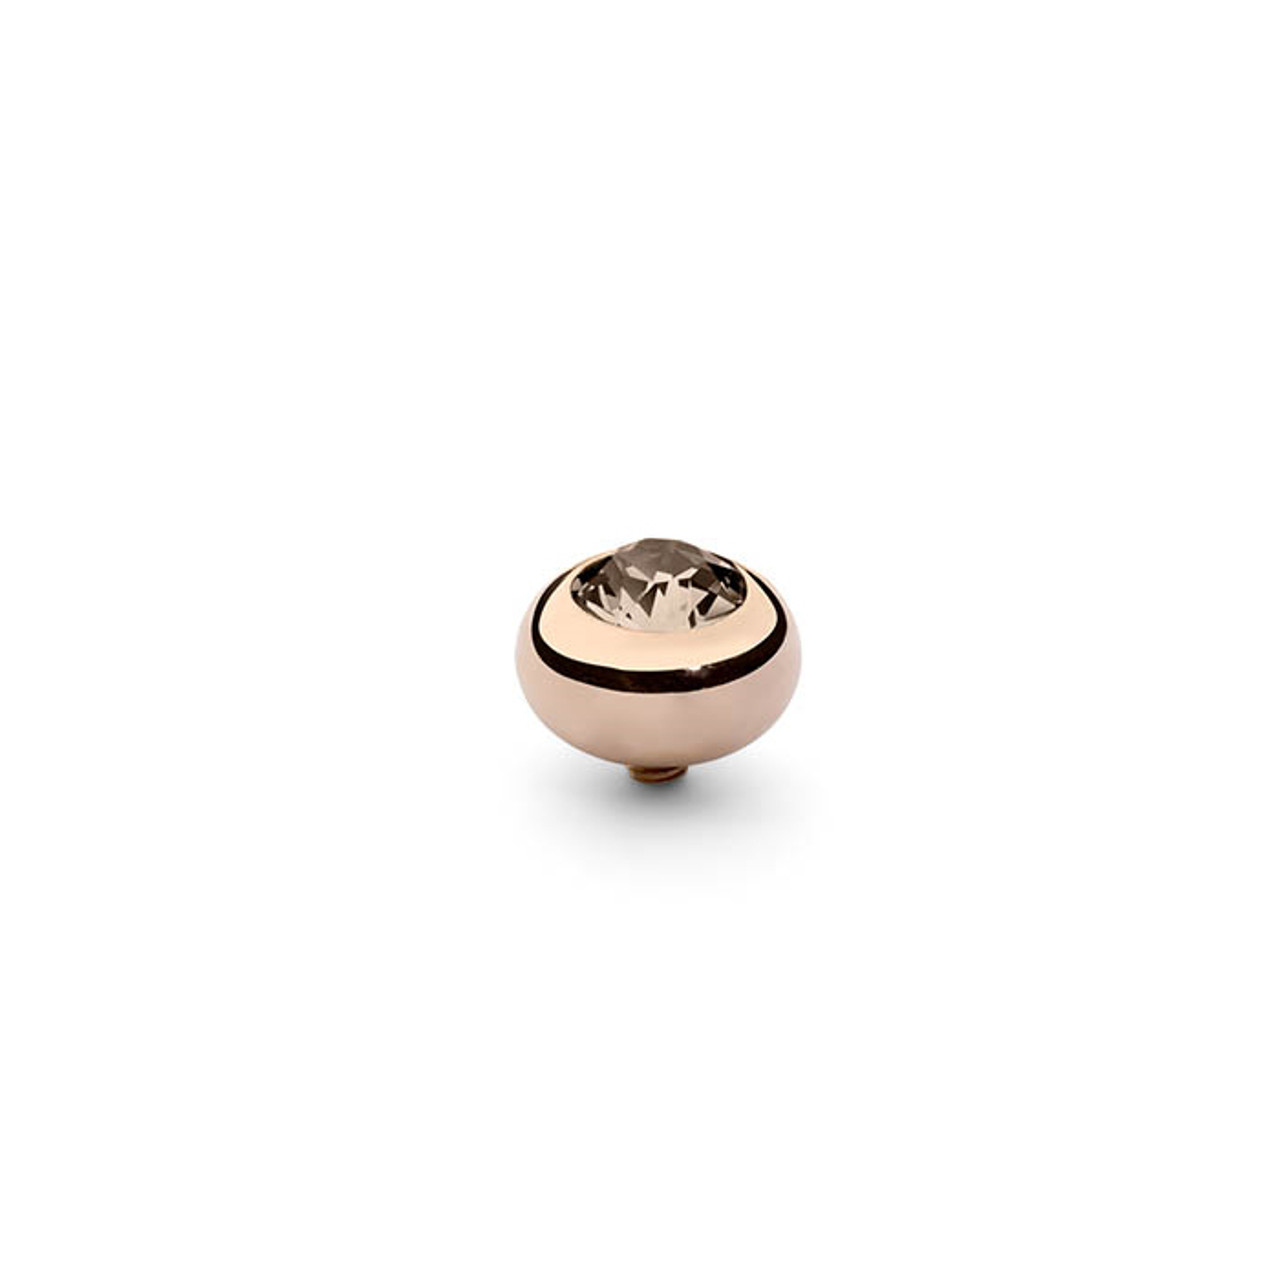 Idol Inspiration inch Silk 10mm Rose Gold Interchangeable Top by Qudo Jewelry - The Lamp Stand